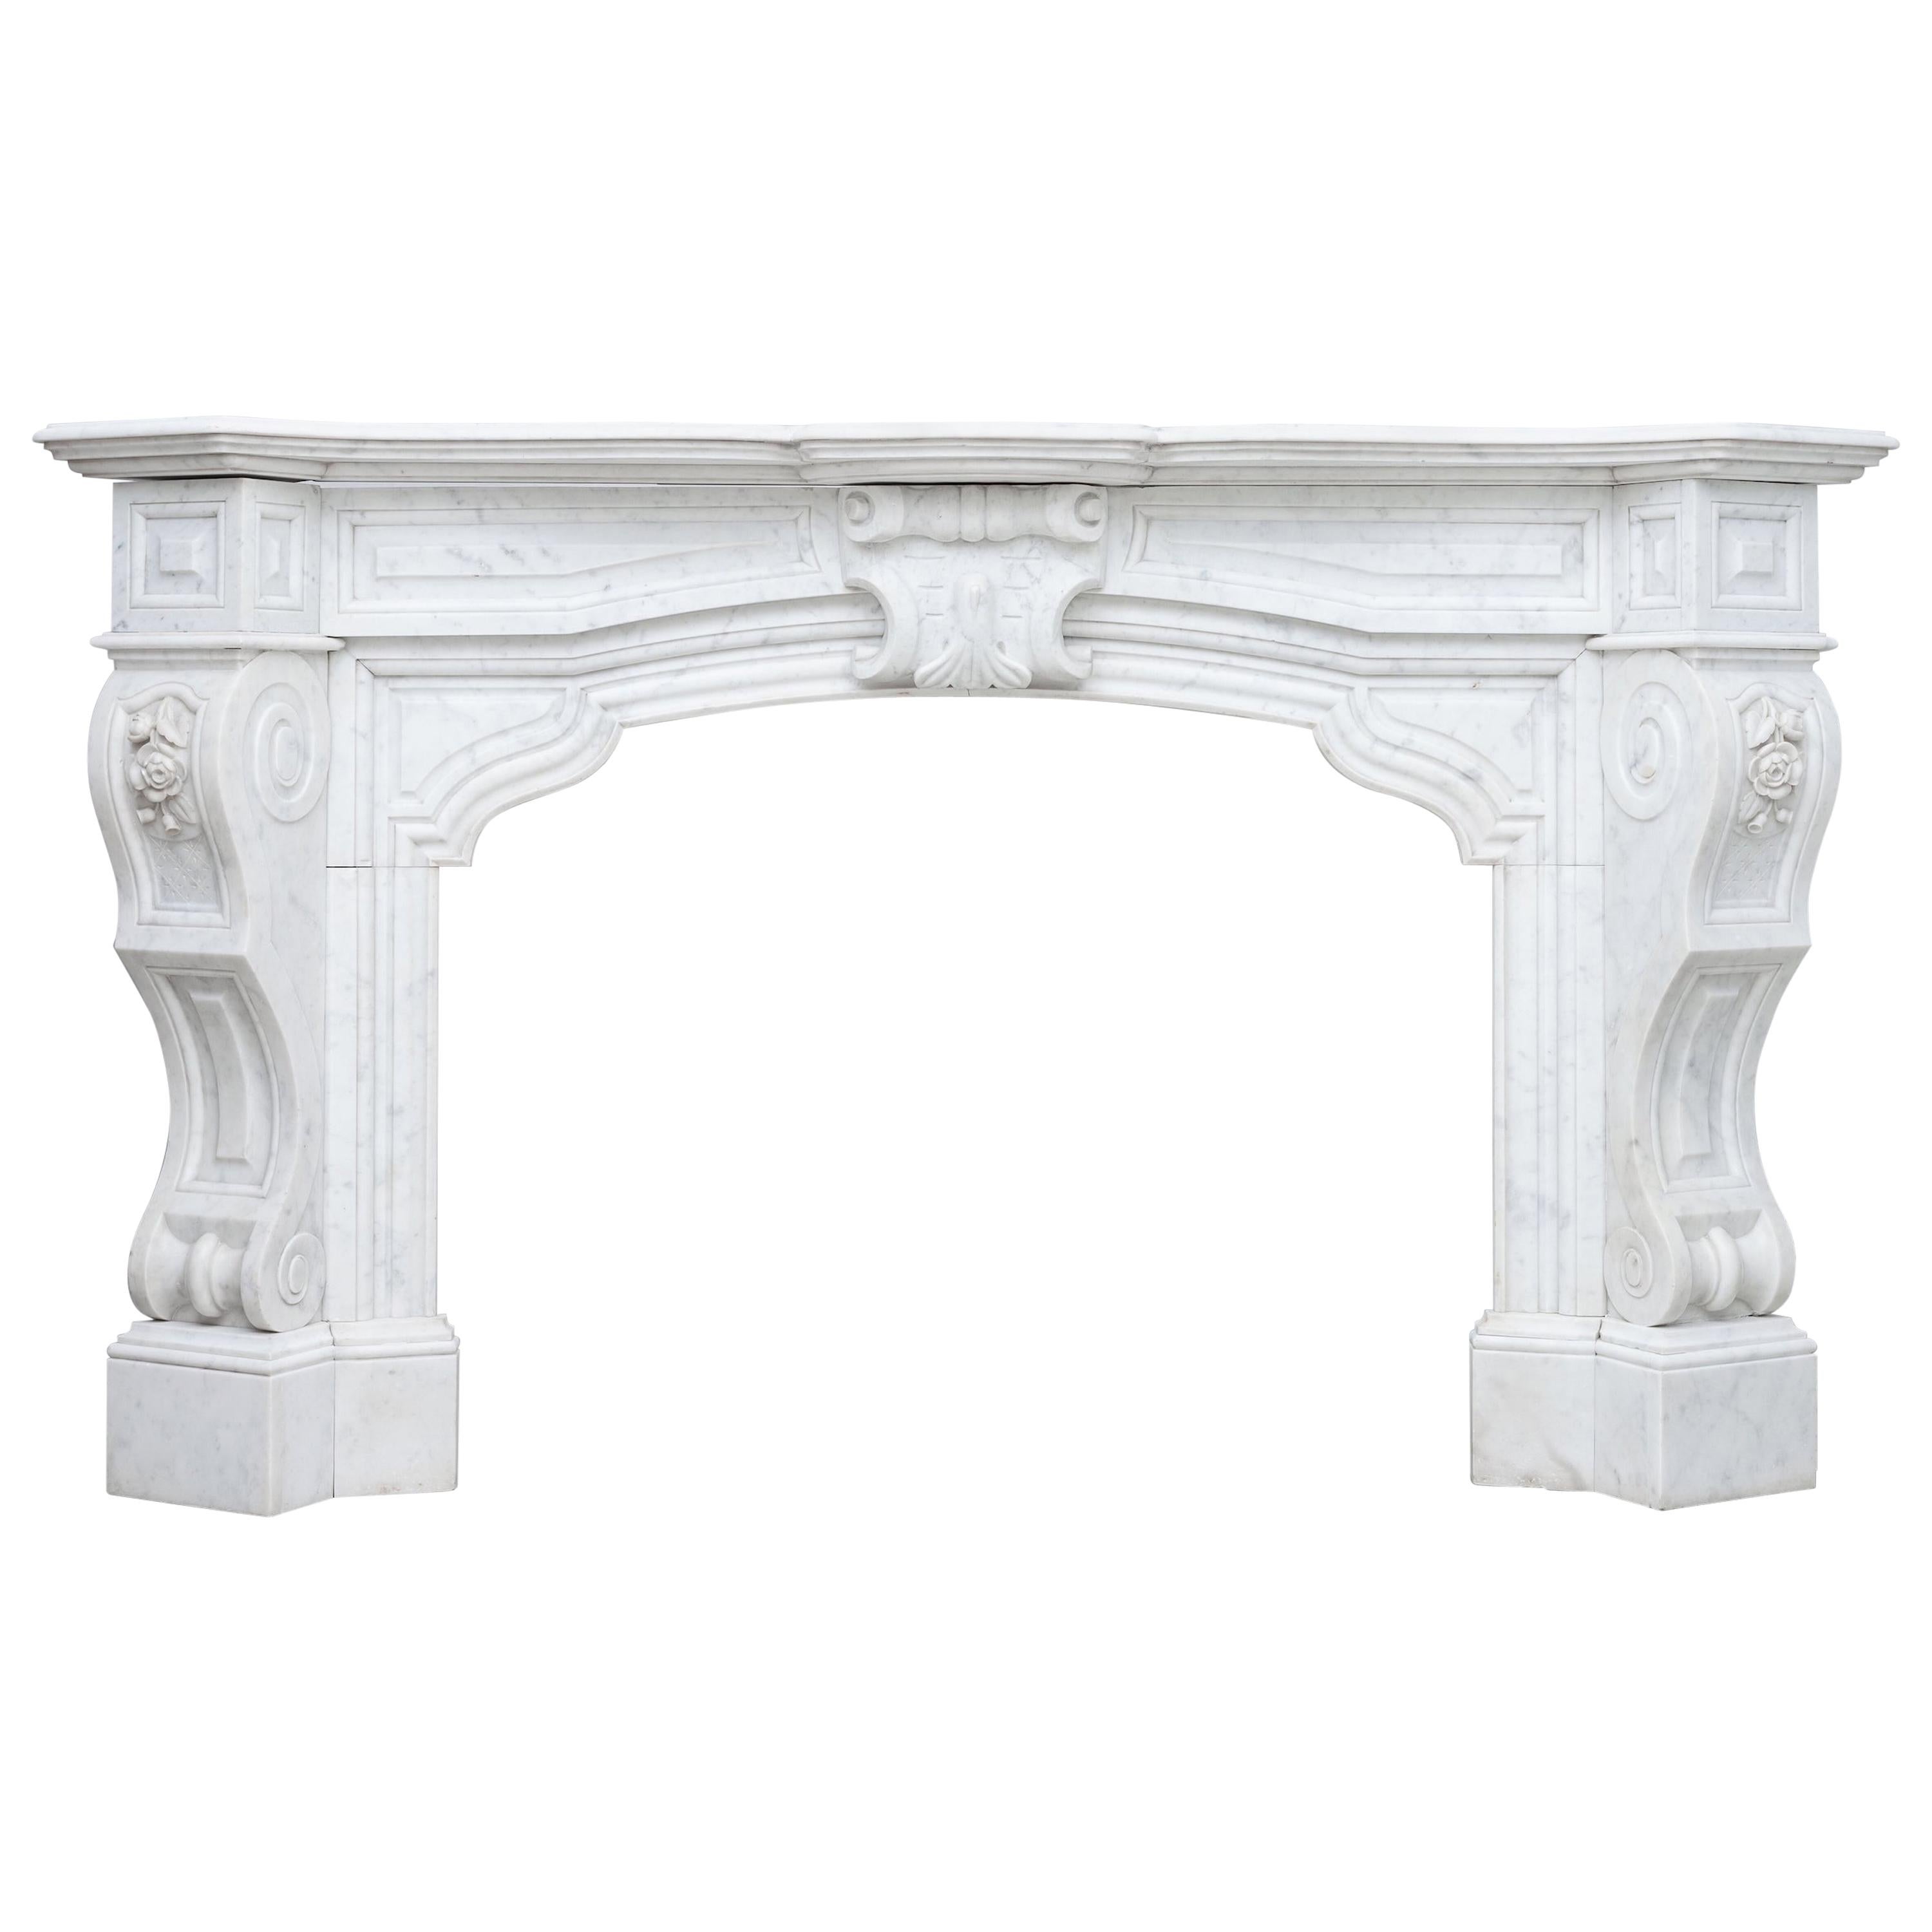 Neoclassical French Carrara Marble White Antique Fireplace